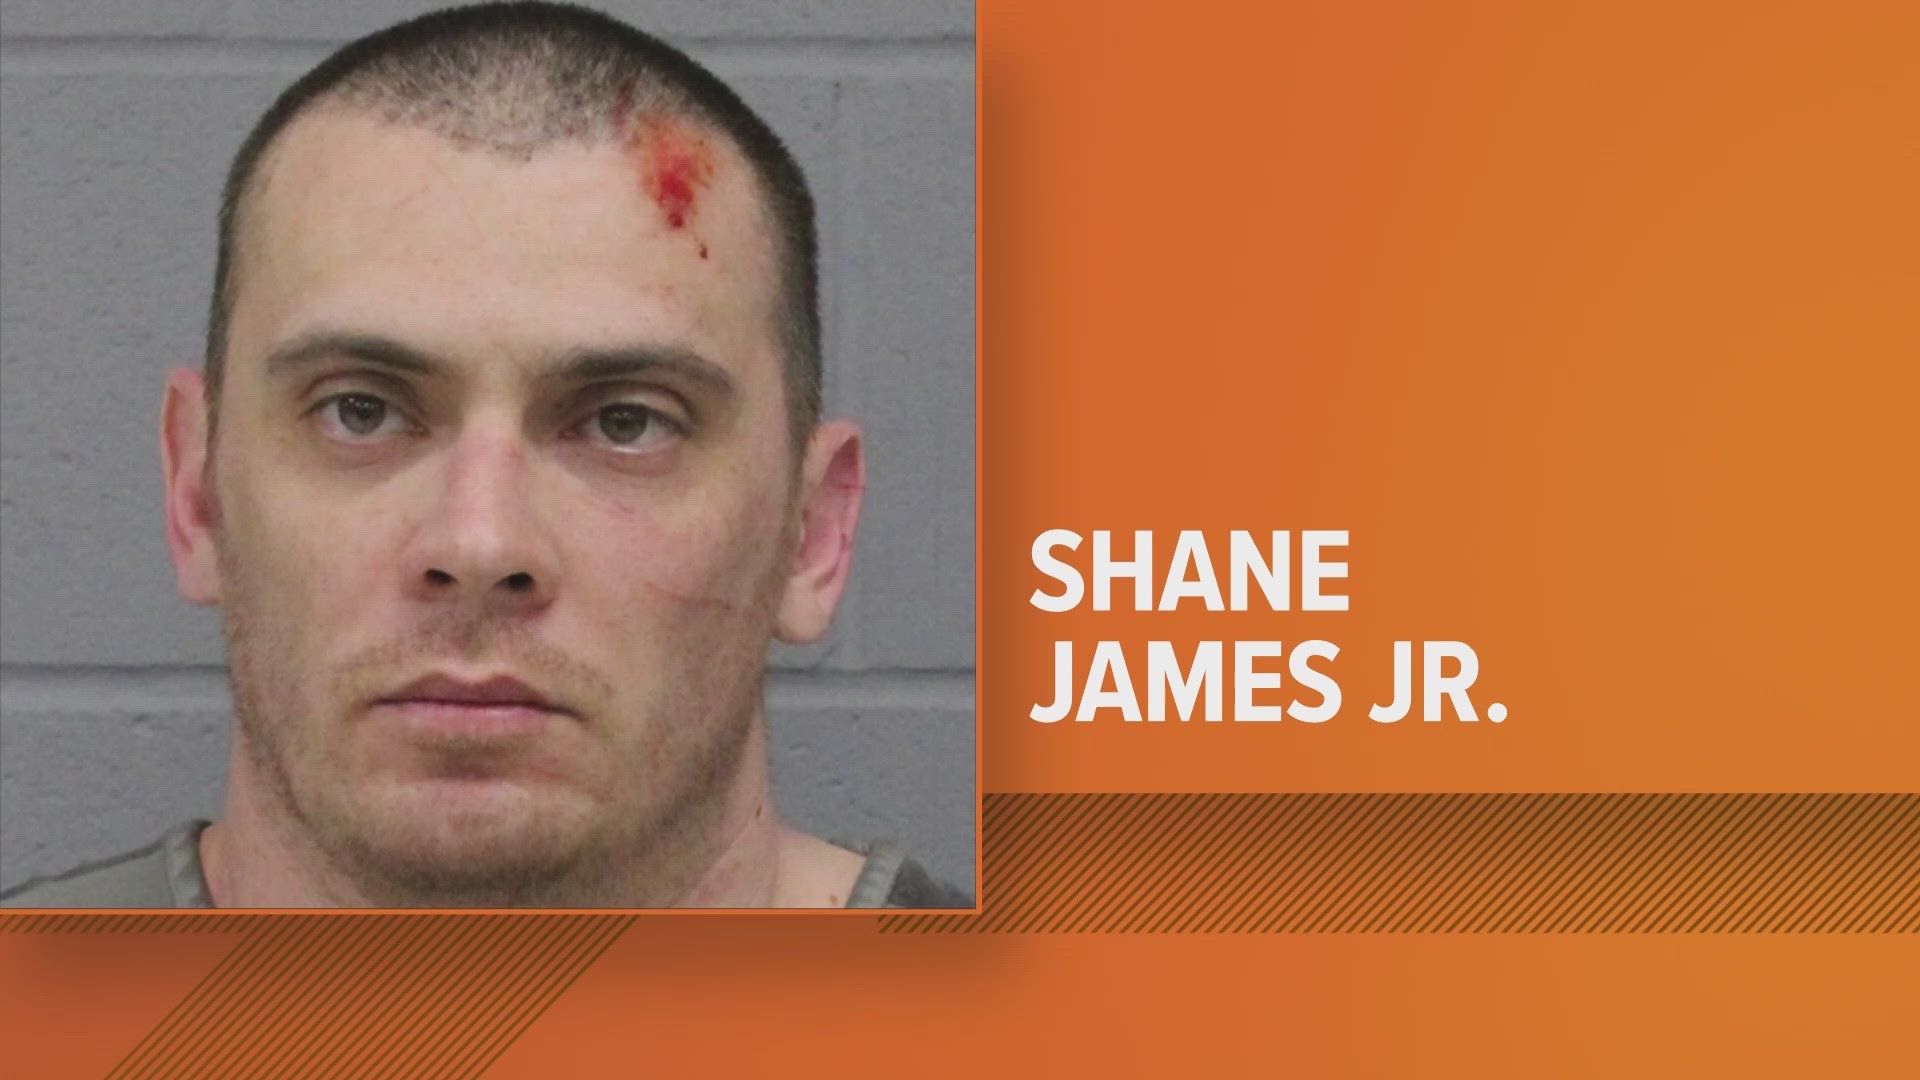 At the pre-trial hearing, the judge granted the state's motion to consolidate Shane James Jr.'s bonds, which currently total more than $1 million.